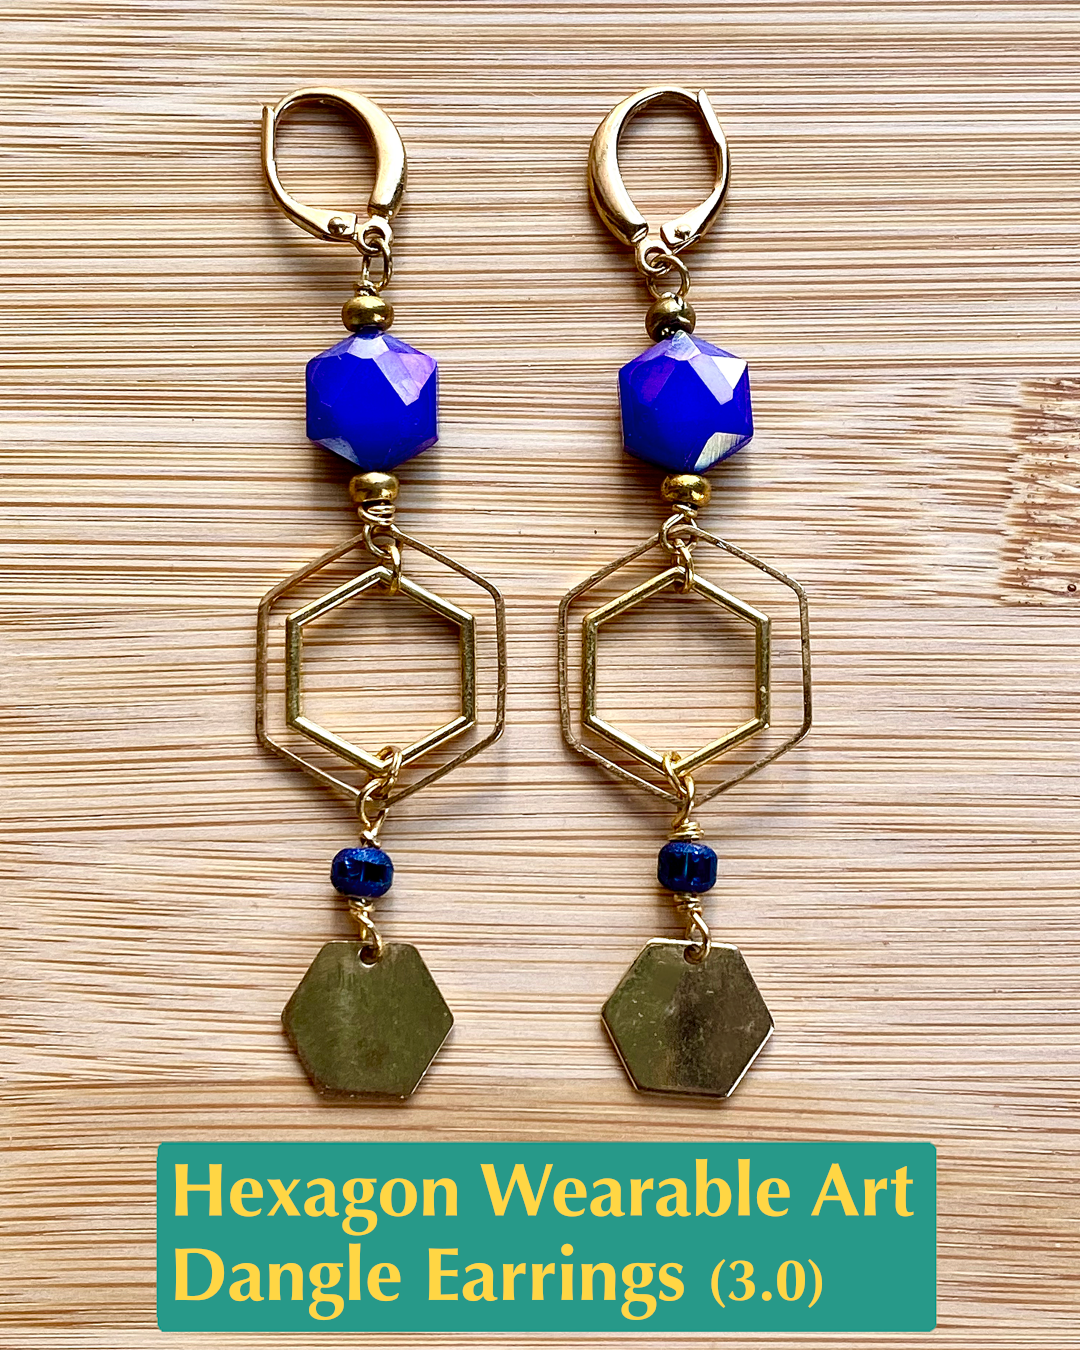 Handmade dangle earrings with blue crystals and gold color hexagon charms